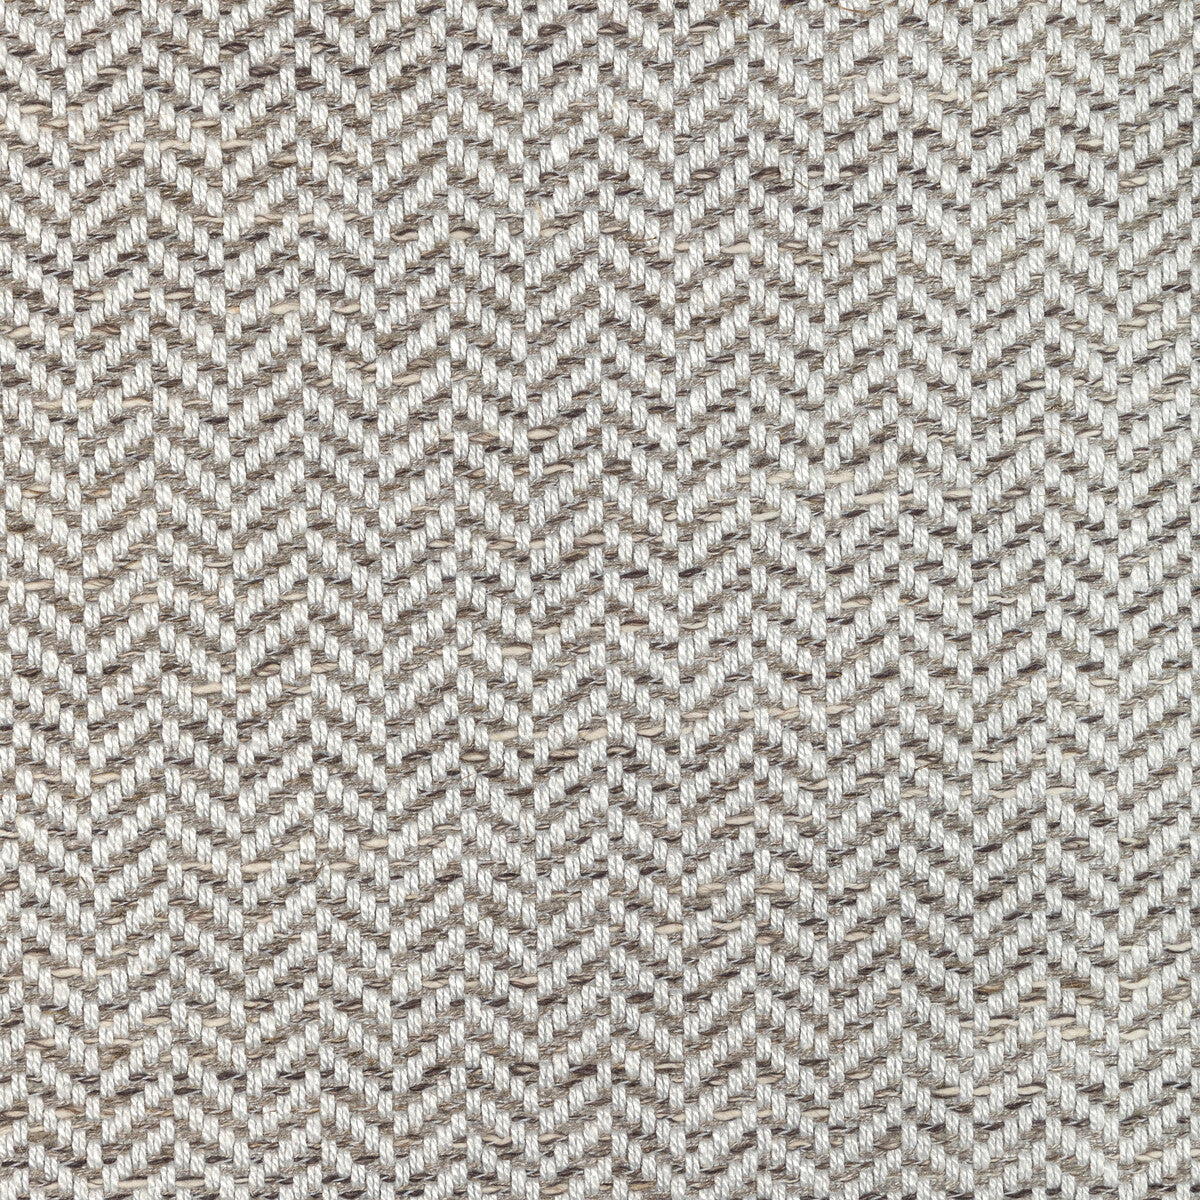 Verve Weave fabric in dove color - pattern 36358.1611.0 - by Kravet Couture in the Corey Damen Jenkins Trad Nouveau collection